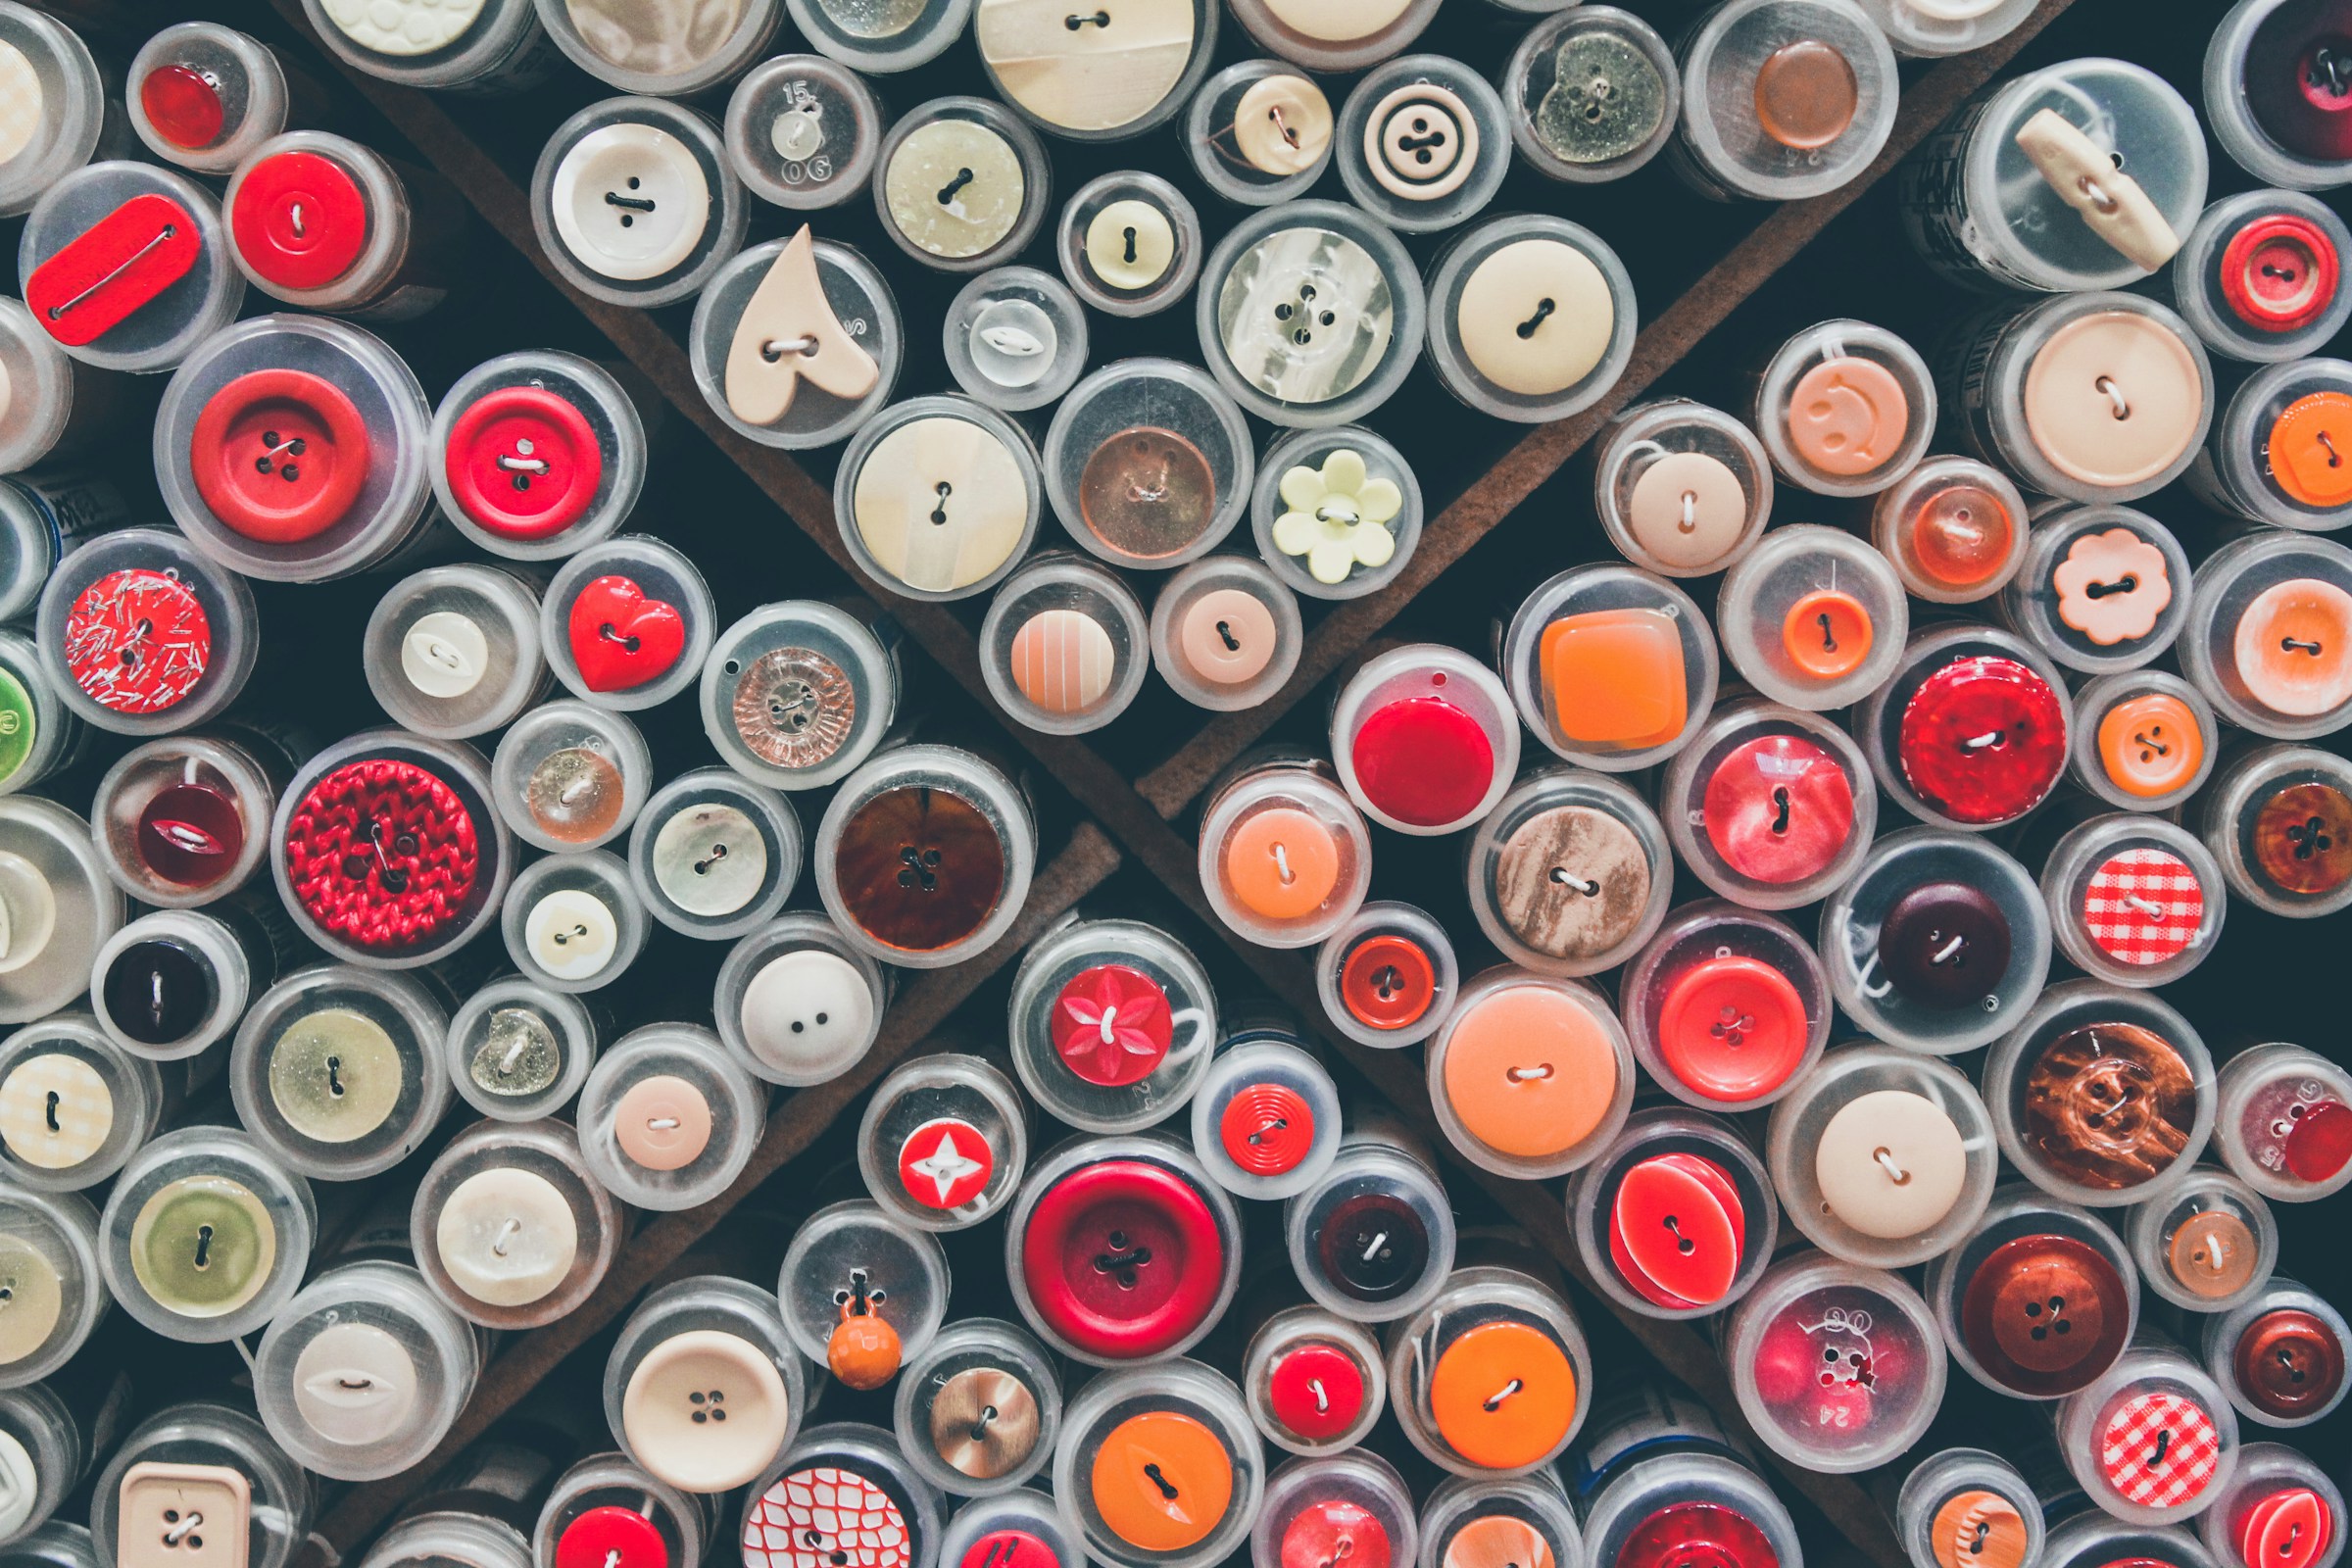 An aerial view of different buttons | Source: Unsplash